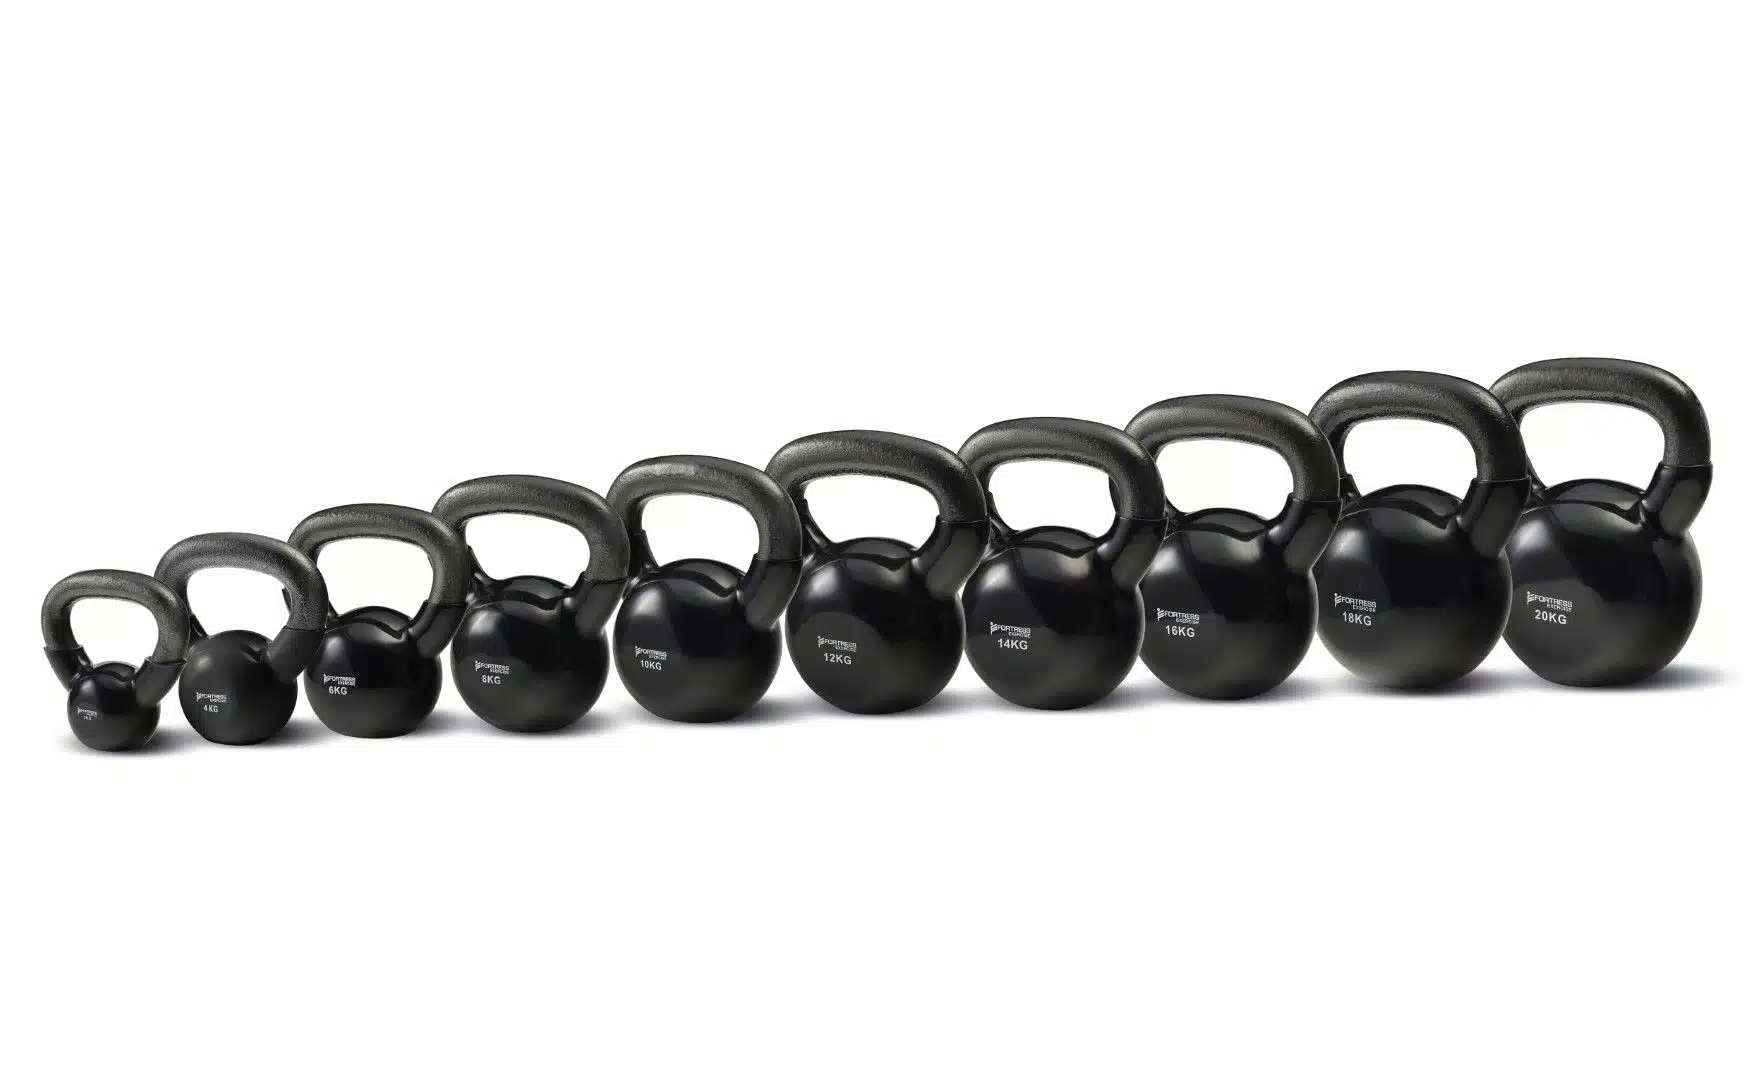 Kettlebell Weight - Available in multiple weight sizes - Chiro Shopping